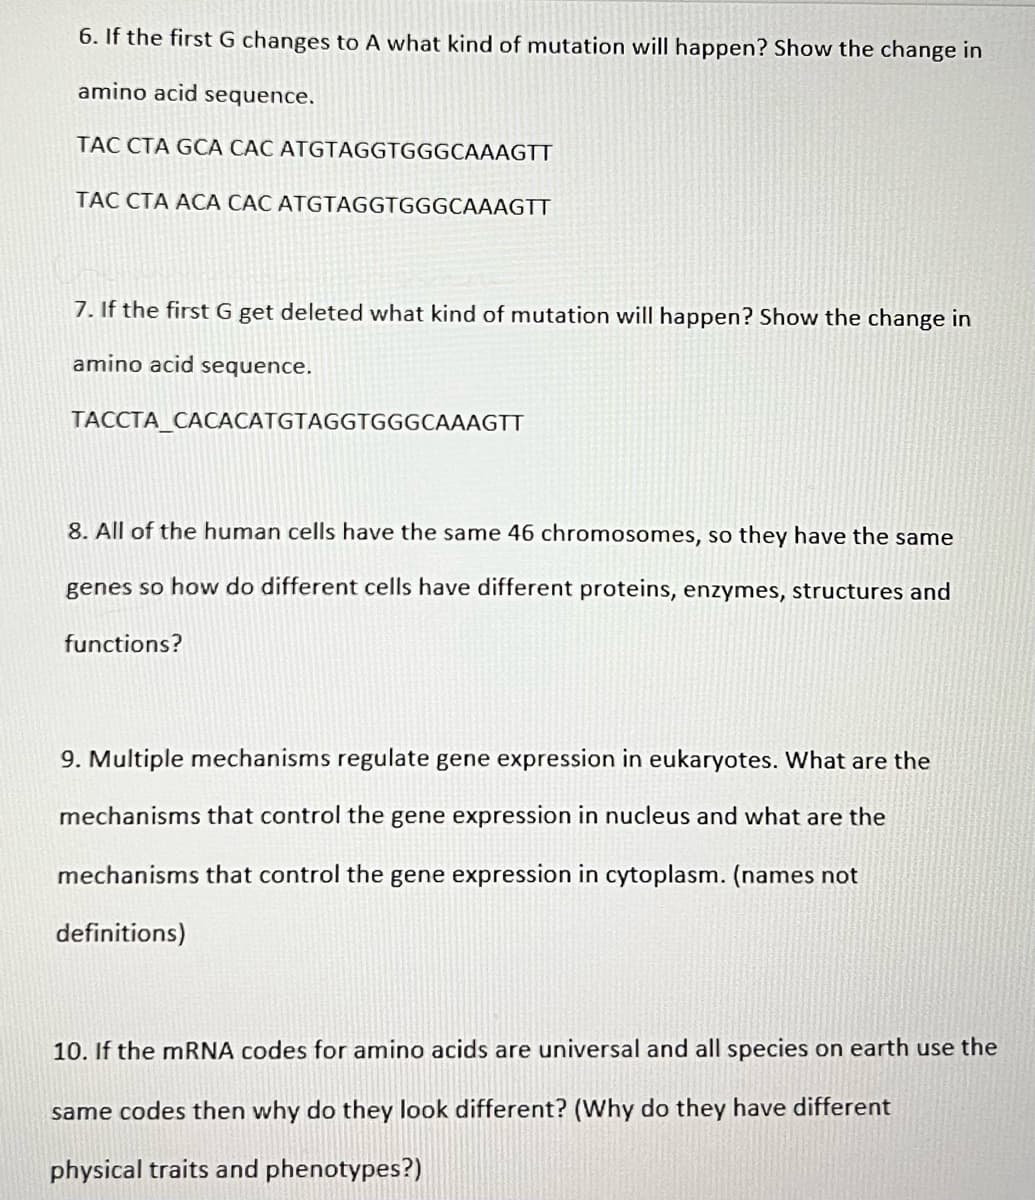 6. If the first G changes to A what kind of mutation will happen? Show the change in
amino acid sequence.
TAC CTA GCA CÁC ATGTAGGTGGGCAAAGTT
TAC CTA ACA CÁC ATGTAGGTGGGCAAAGTT
7. If the first G get deleted what kind of mutation will happen? Show the change in
amino acid sequence.
TACCTA_CACACATGTAGGTGGGCAAAGTT
8. All of the human cells have the same 46 chromosomes, so they have the same
genes so how do different cells have different proteins, enzymes, structures and
functions?
9. Multiple mechanisms regulate gene expression in eukaryotes. What are the
mechanisms that control the gene expression in nucleus and what are the
mechanisms that control the gene expression in cytoplasm. (names not
definitions)
10. If the MRNA codes for amino acids are universal and all species on earth use the
same codes then why do they look different? (Why do they have different
physical traits and phenotypes?)
